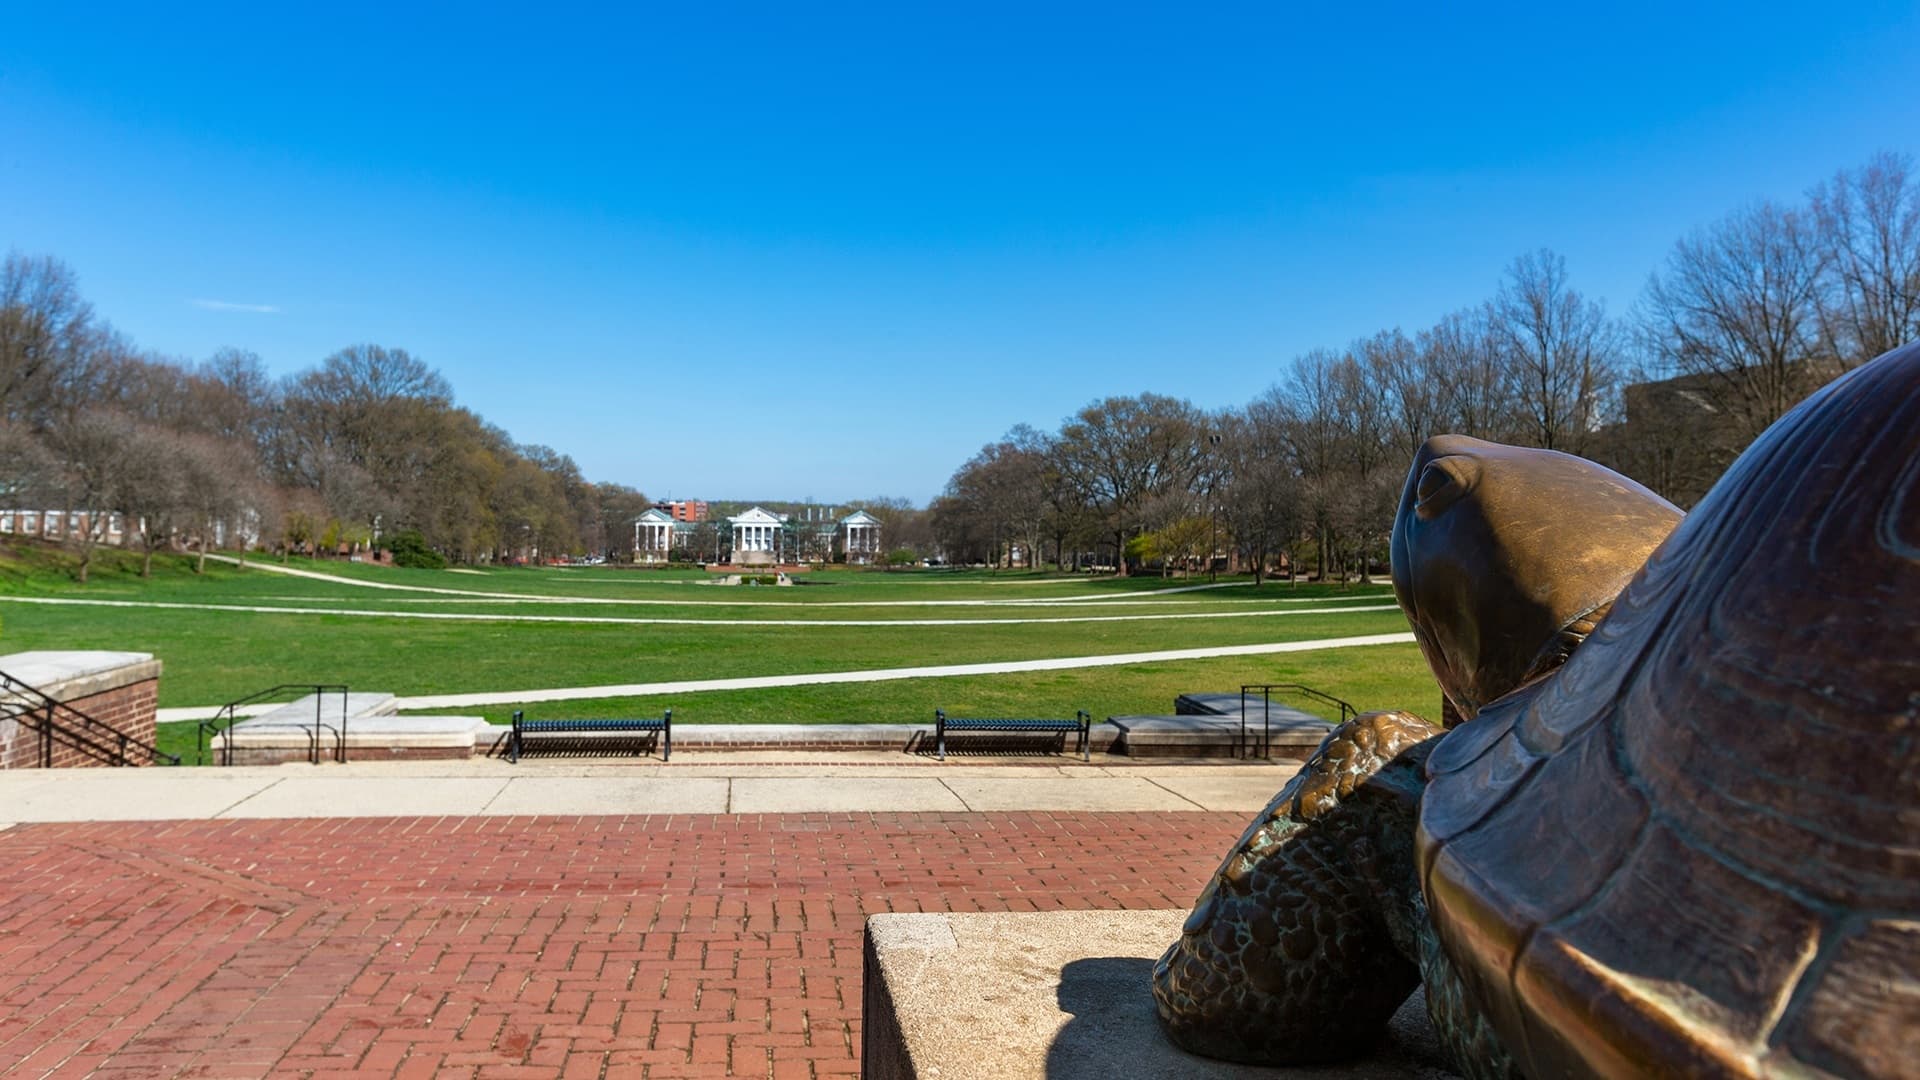 Testudo the statue looking out over McKeldin Mall toward the Aministration building on the other side. Clear blue Skies match a bright green lawn.